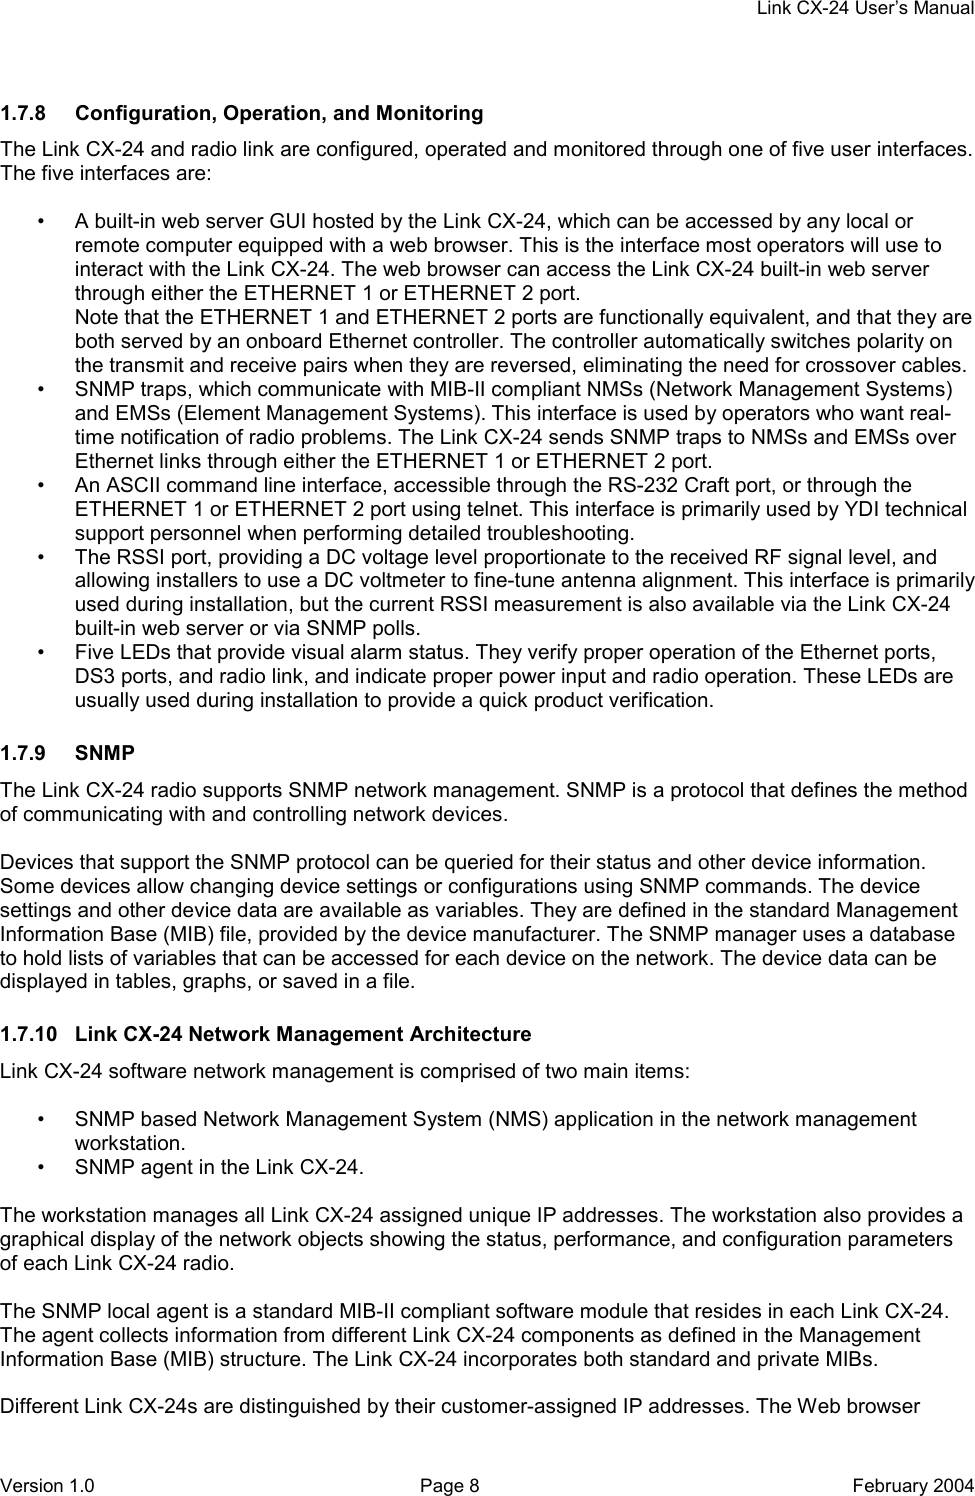     Link CX-24 User’s Manual Version 1.0  Page 8  February 2004 1.7.8  Configuration, Operation, and Monitoring The Link CX-24 and radio link are configured, operated and monitored through one of five user interfaces. The five interfaces are:  •  A built-in web server GUI hosted by the Link CX-24, which can be accessed by any local or remote computer equipped with a web browser. This is the interface most operators will use to interact with the Link CX-24. The web browser can access the Link CX-24 built-in web server through either the ETHERNET 1 or ETHERNET 2 port. Note that the ETHERNET 1 and ETHERNET 2 ports are functionally equivalent, and that they are both served by an onboard Ethernet controller. The controller automatically switches polarity on the transmit and receive pairs when they are reversed, eliminating the need for crossover cables. •  SNMP traps, which communicate with MIB-II compliant NMSs (Network Management Systems) and EMSs (Element Management Systems). This interface is used by operators who want real-time notification of radio problems. The Link CX-24 sends SNMP traps to NMSs and EMSs over Ethernet links through either the ETHERNET 1 or ETHERNET 2 port. •  An ASCII command line interface, accessible through the RS-232 Craft port, or through the ETHERNET 1 or ETHERNET 2 port using telnet. This interface is primarily used by YDI technical support personnel when performing detailed troubleshooting. •  The RSSI port, providing a DC voltage level proportionate to the received RF signal level, and allowing installers to use a DC voltmeter to fine-tune antenna alignment. This interface is primarily used during installation, but the current RSSI measurement is also available via the Link CX-24 built-in web server or via SNMP polls. •  Five LEDs that provide visual alarm status. They verify proper operation of the Ethernet ports, DS3 ports, and radio link, and indicate proper power input and radio operation. These LEDs are usually used during installation to provide a quick product verification. 1.7.9 SNMP The Link CX-24 radio supports SNMP network management. SNMP is a protocol that defines the method of communicating with and controlling network devices.  Devices that support the SNMP protocol can be queried for their status and other device information. Some devices allow changing device settings or configurations using SNMP commands. The device settings and other device data are available as variables. They are defined in the standard Management Information Base (MIB) file, provided by the device manufacturer. The SNMP manager uses a database to hold lists of variables that can be accessed for each device on the network. The device data can be displayed in tables, graphs, or saved in a file. 1.7.10  Link CX-24 Network Management Architecture Link CX-24 software network management is comprised of two main items:  •  SNMP based Network Management System (NMS) application in the network management workstation. •  SNMP agent in the Link CX-24.  The workstation manages all Link CX-24 assigned unique IP addresses. The workstation also provides a graphical display of the network objects showing the status, performance, and configuration parameters of each Link CX-24 radio.  The SNMP local agent is a standard MIB-II compliant software module that resides in each Link CX-24. The agent collects information from different Link CX-24 components as defined in the Management Information Base (MIB) structure. The Link CX-24 incorporates both standard and private MIBs.  Different Link CX-24s are distinguished by their customer-assigned IP addresses. The Web browser 